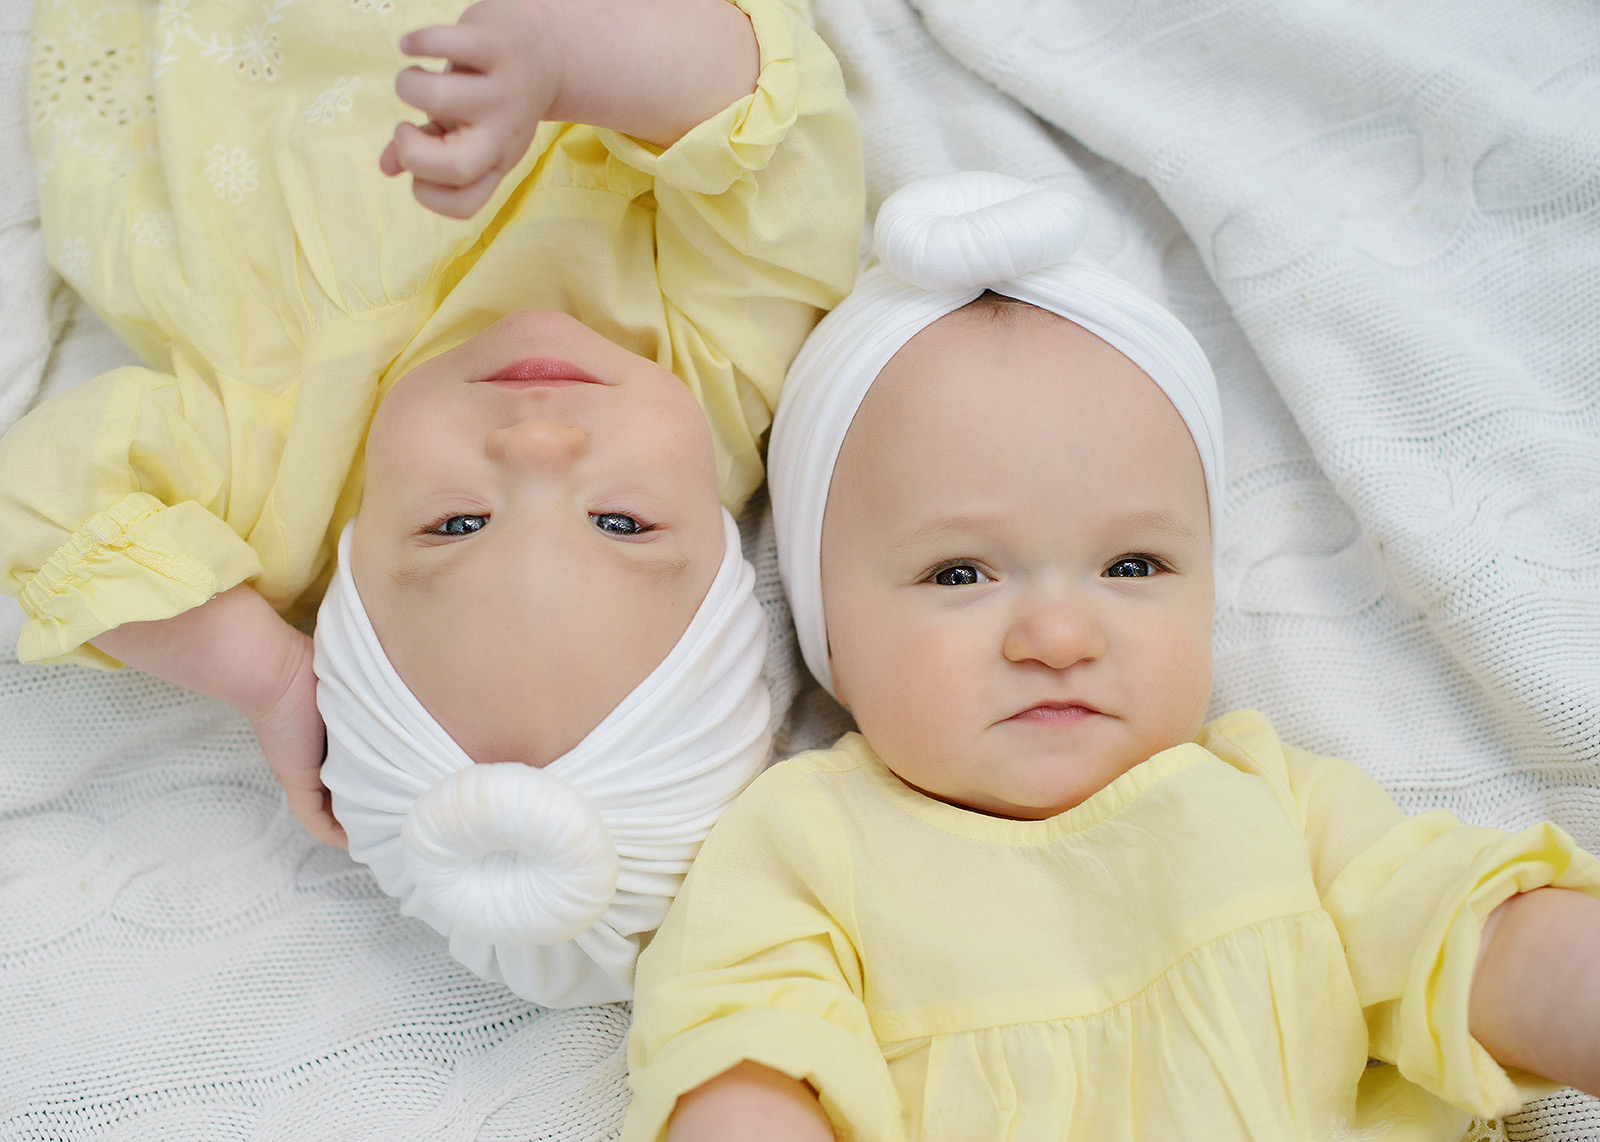 Twin baby girls wearing yellow lying down on white blanket and looking directly at camera